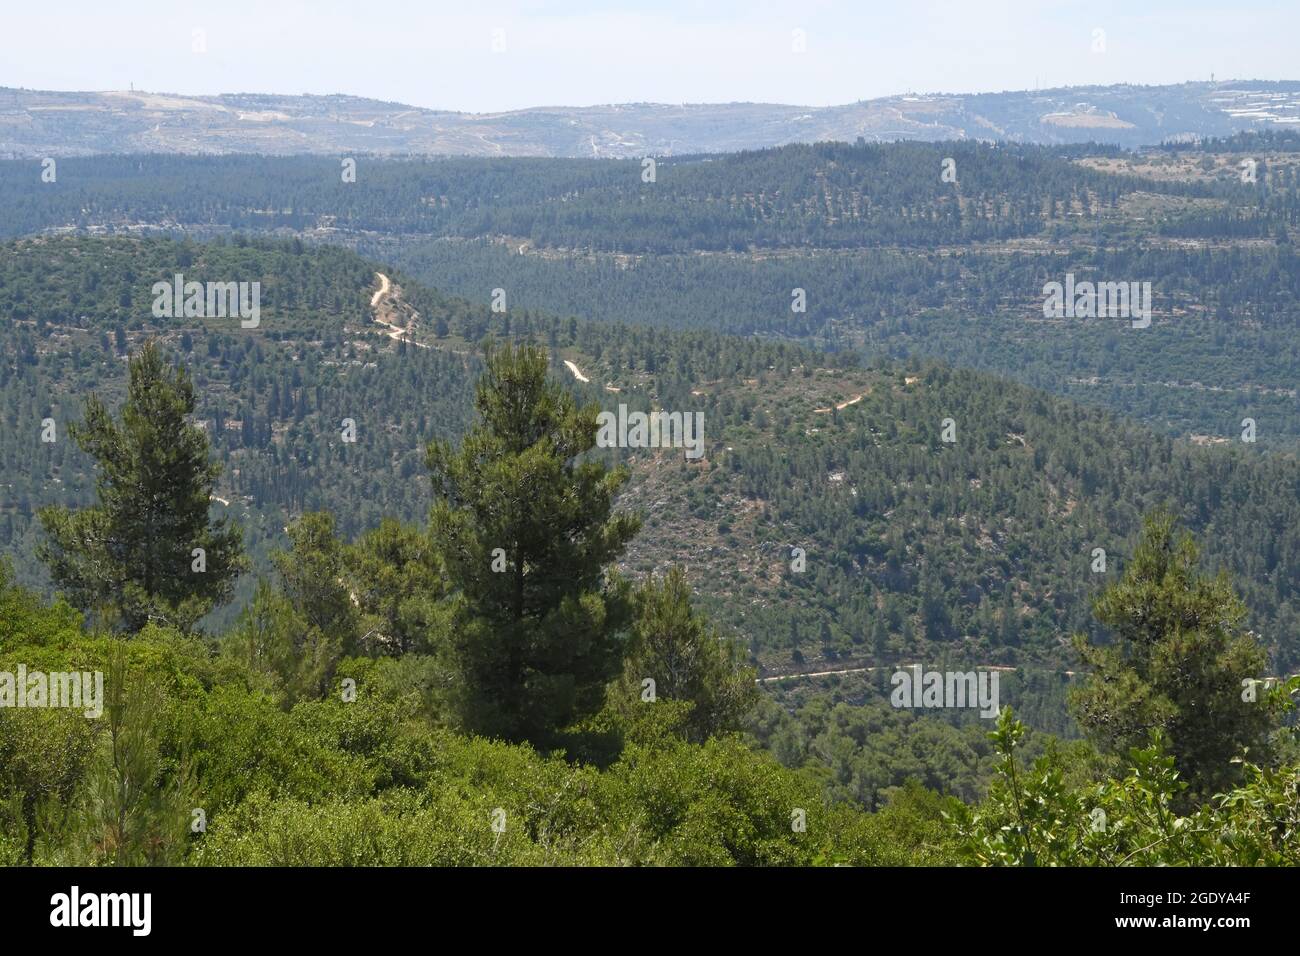 Jerusalem mountains and forests. Israel Stock Photo